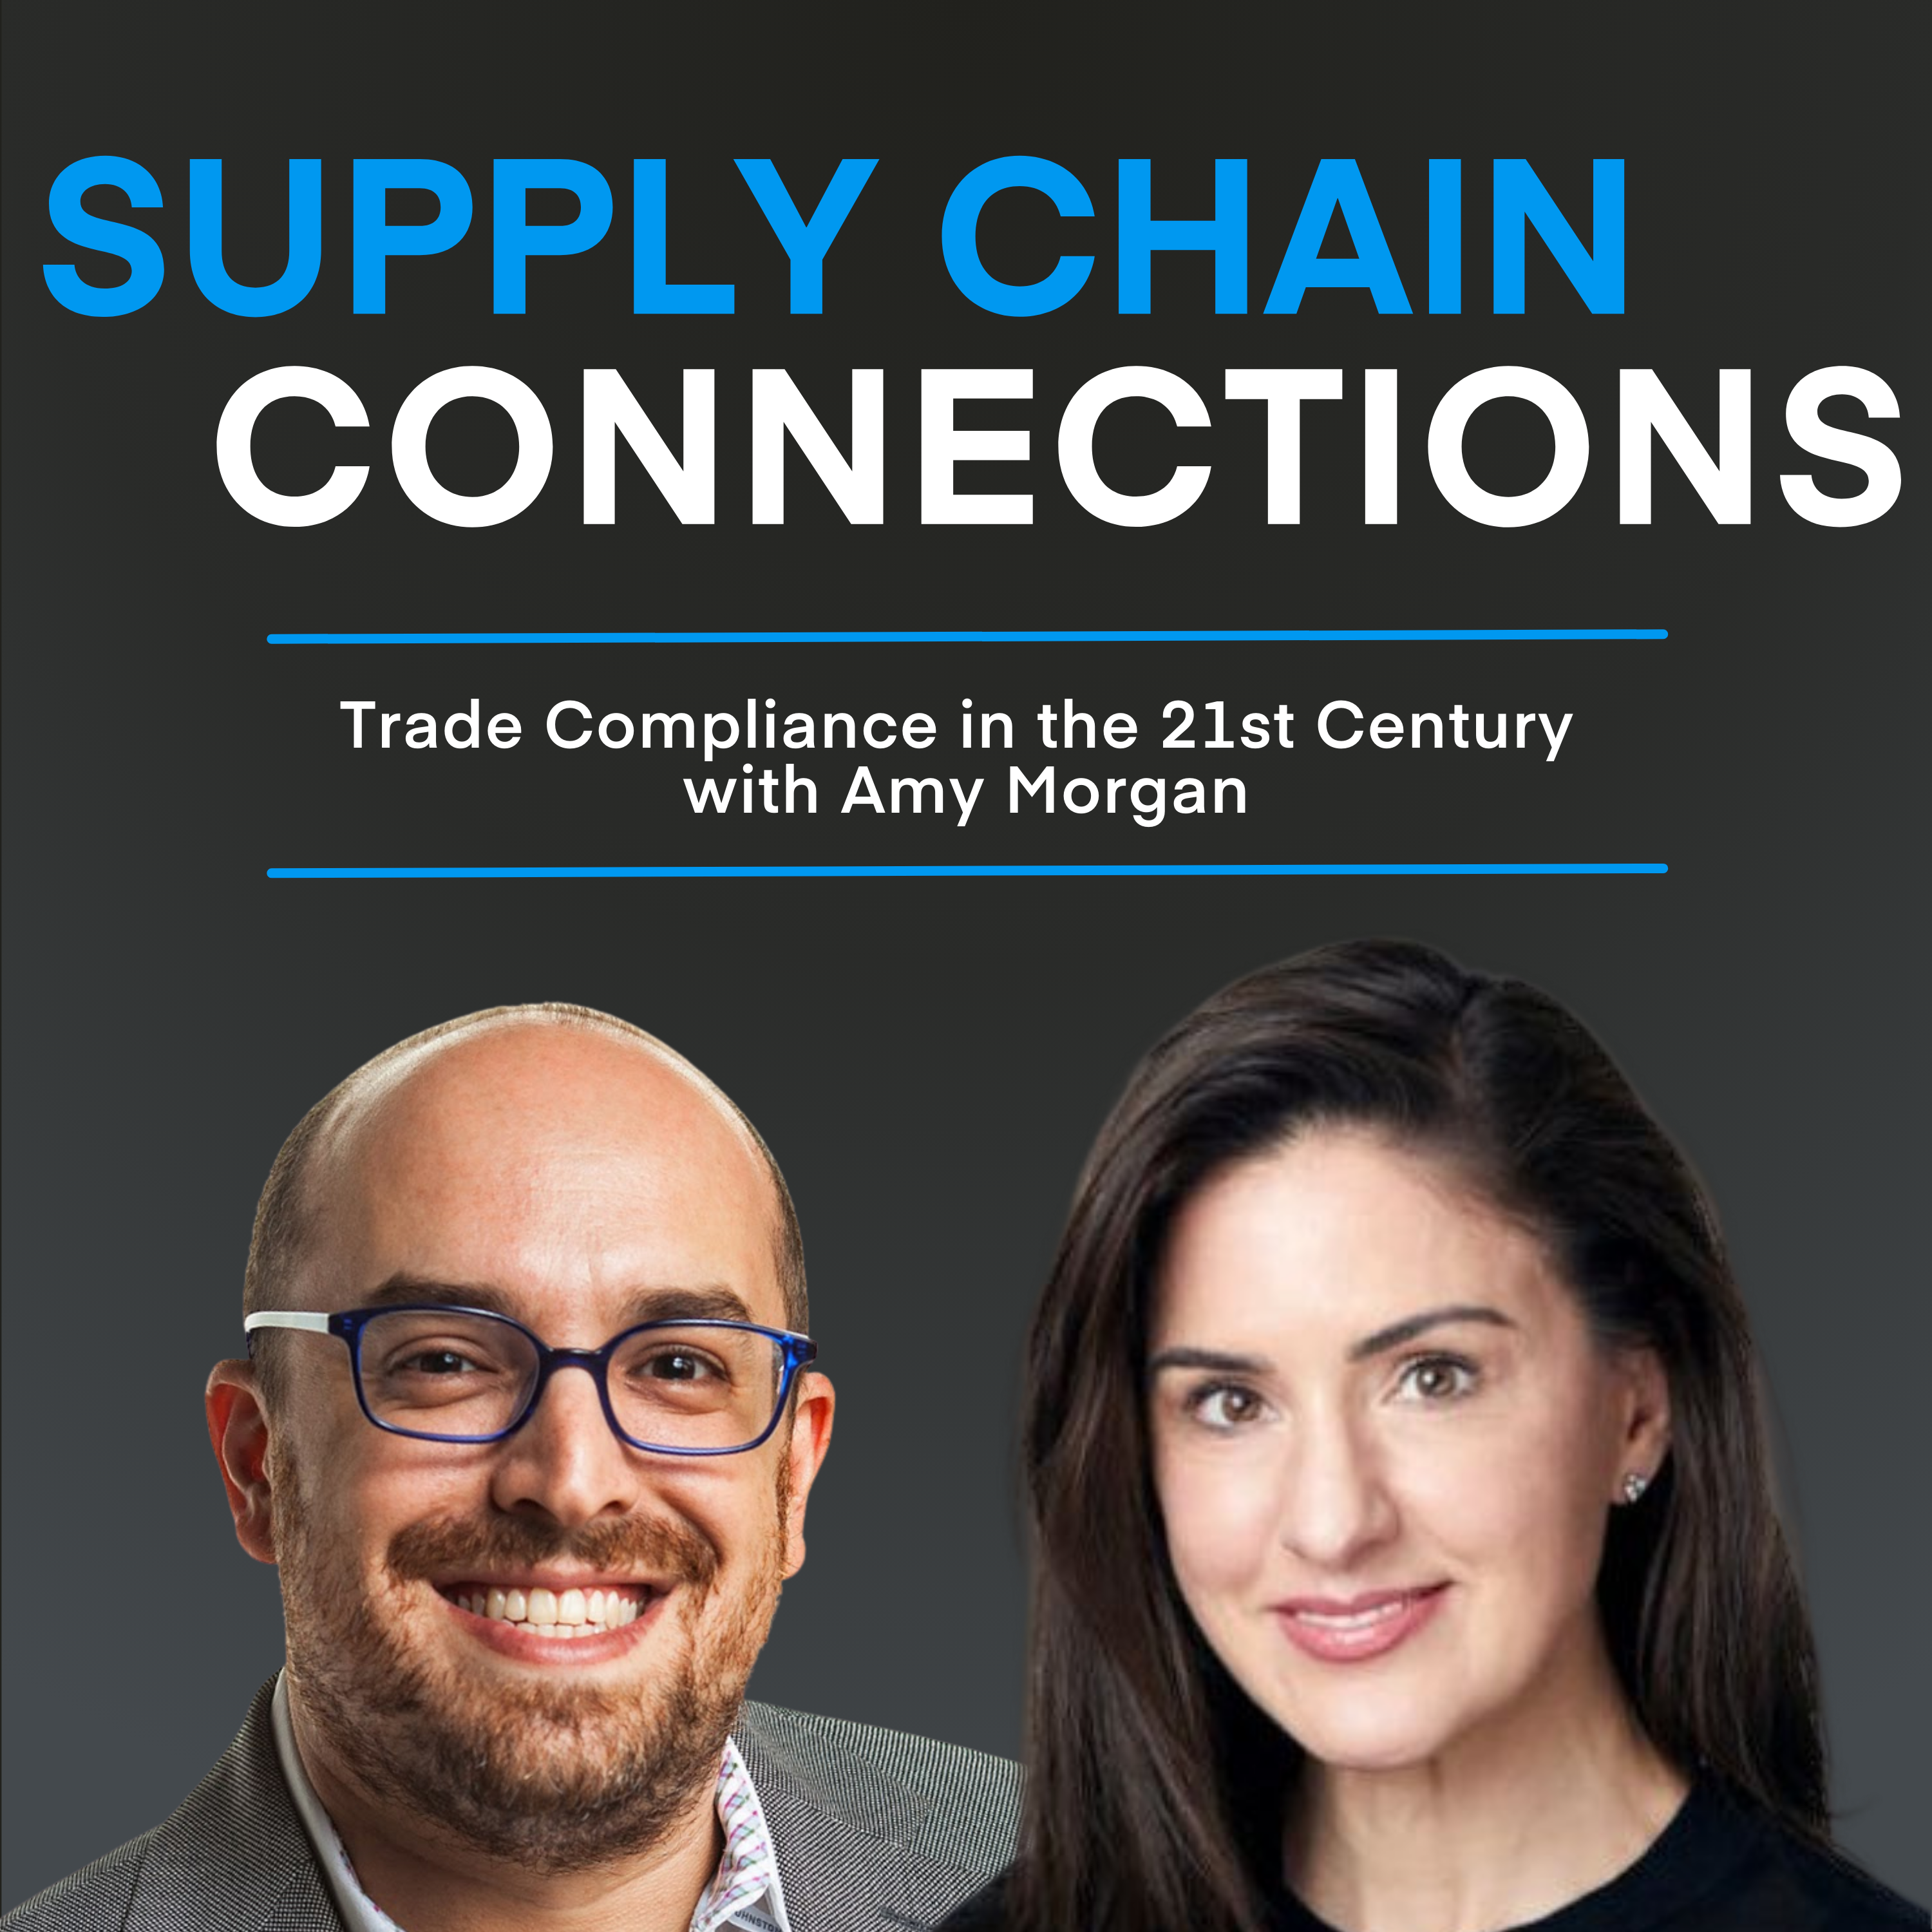 Trade Compliance in the 21st Century with Amy Morgan